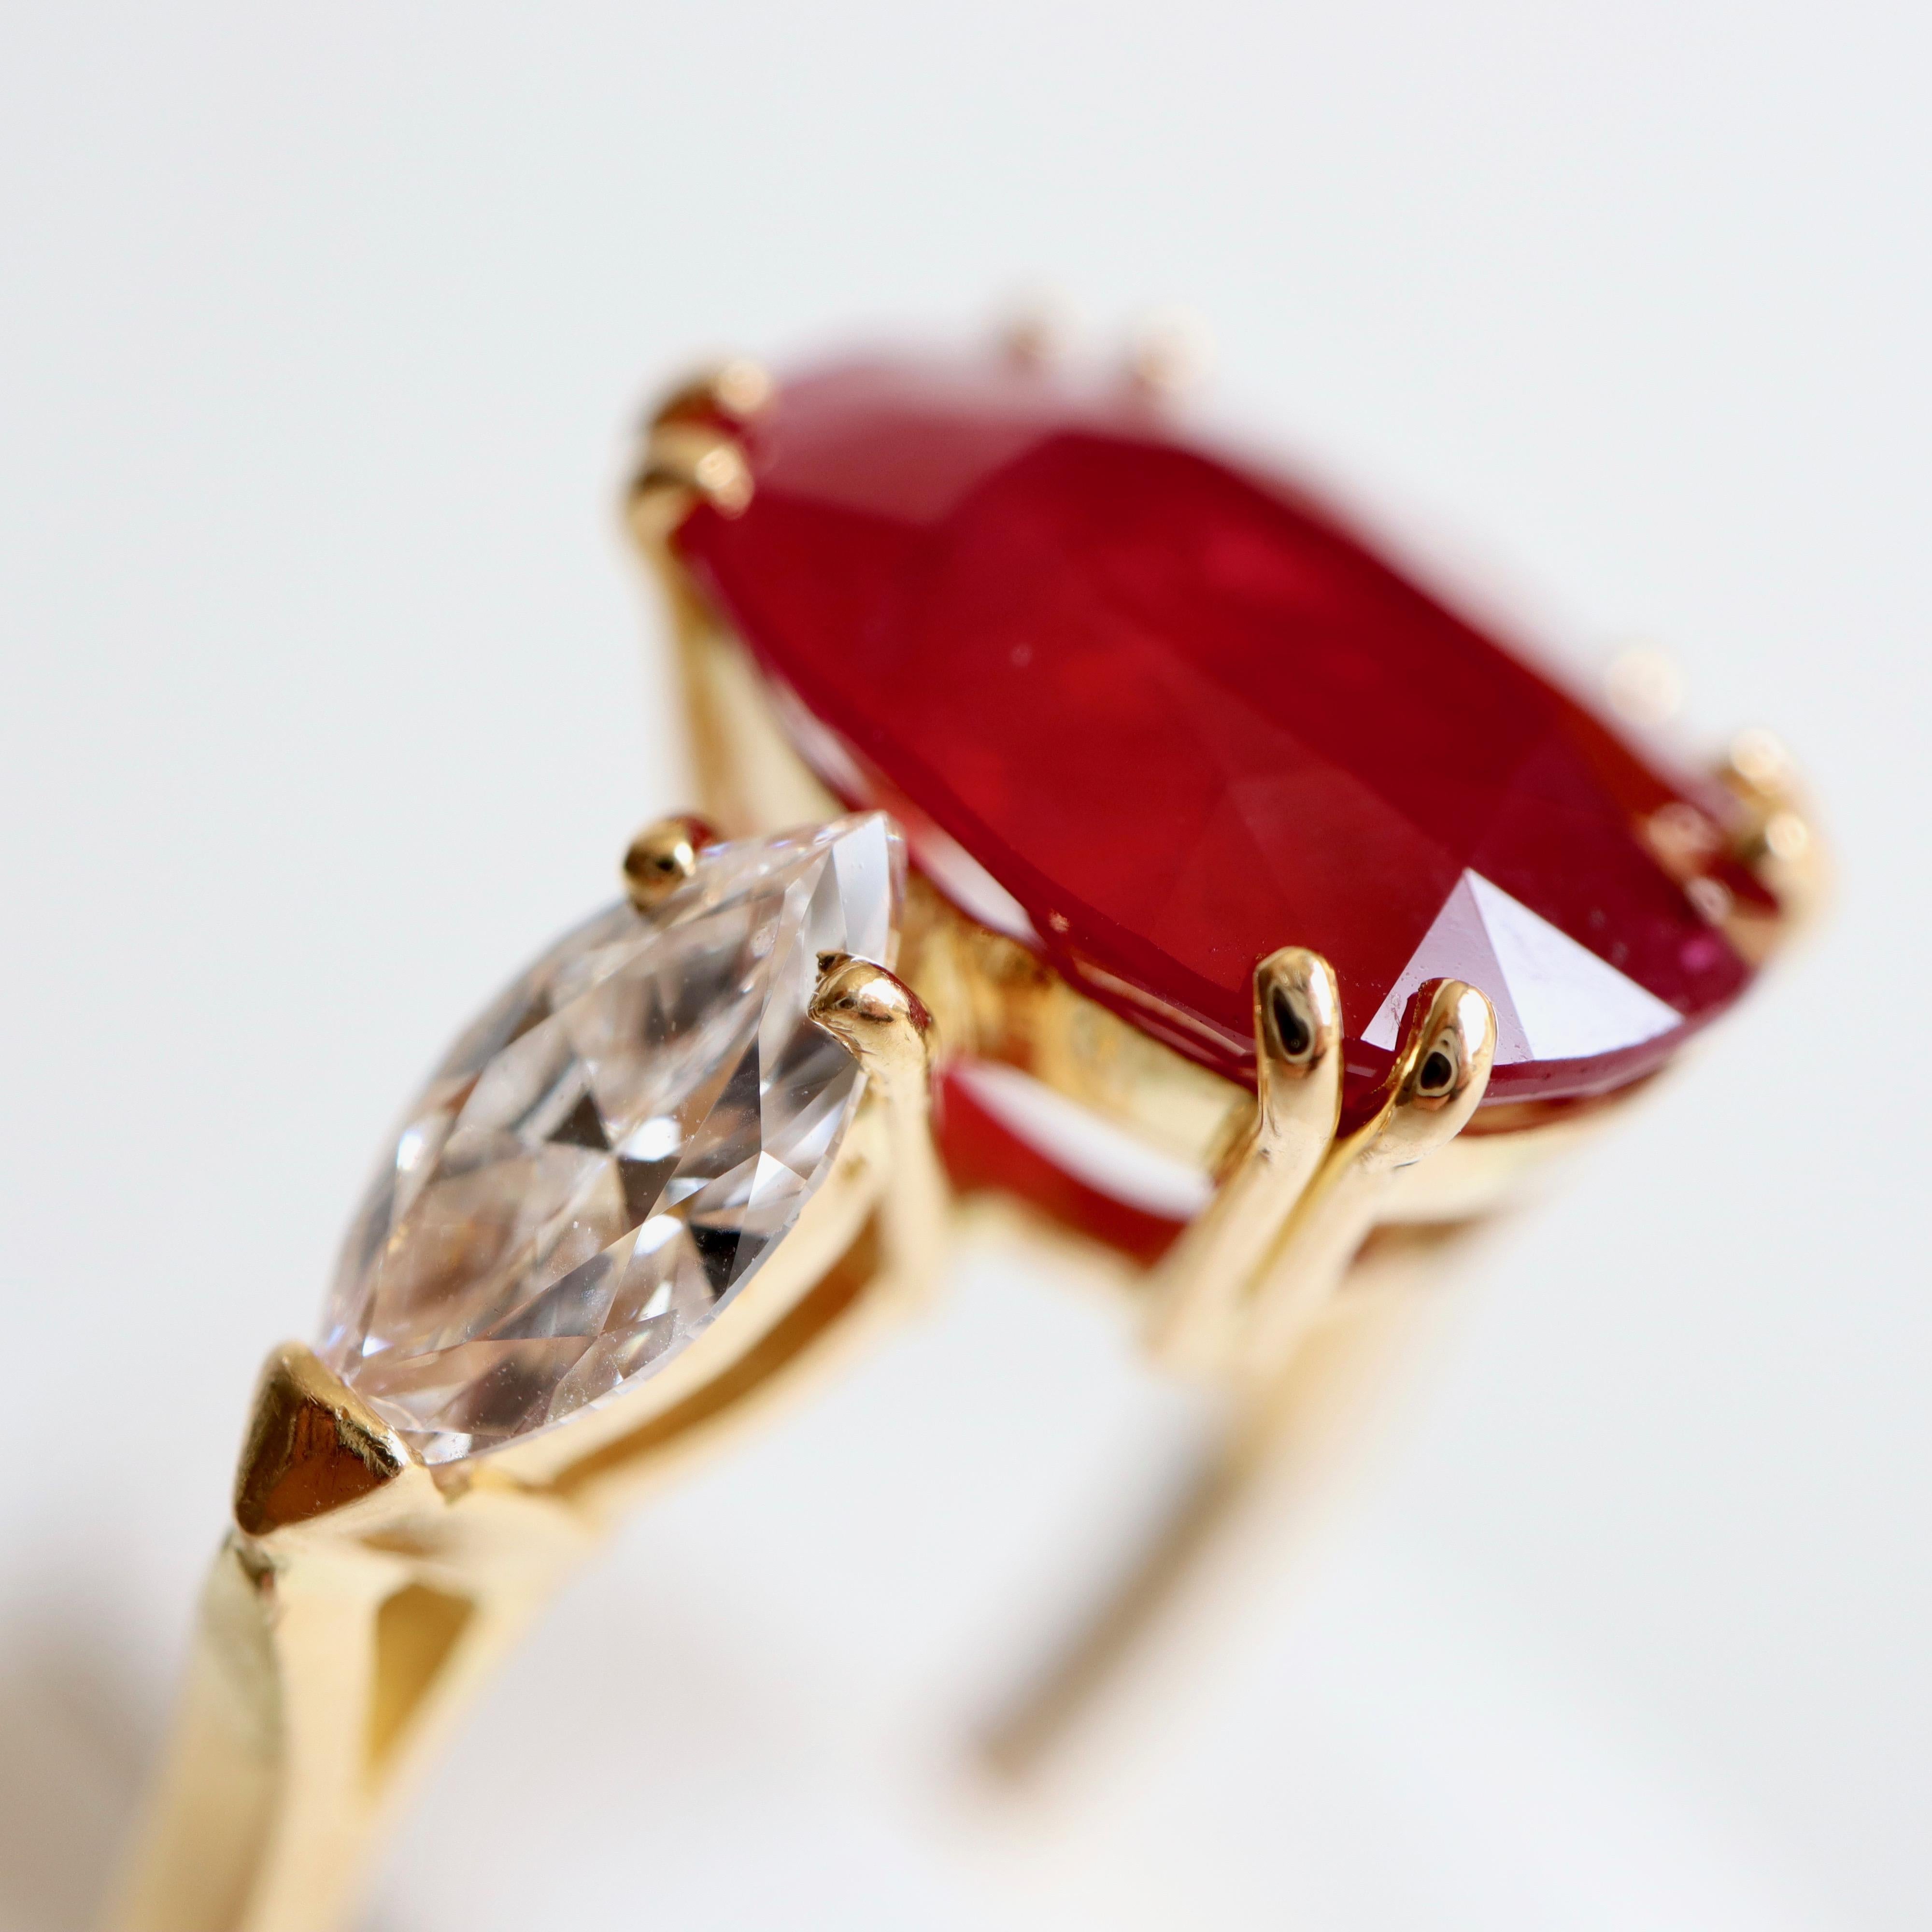 Oval Cut Ruby Ring in 18 Carat Yellow Gold Diamonds and Ruby 5.01 Carat For Sale